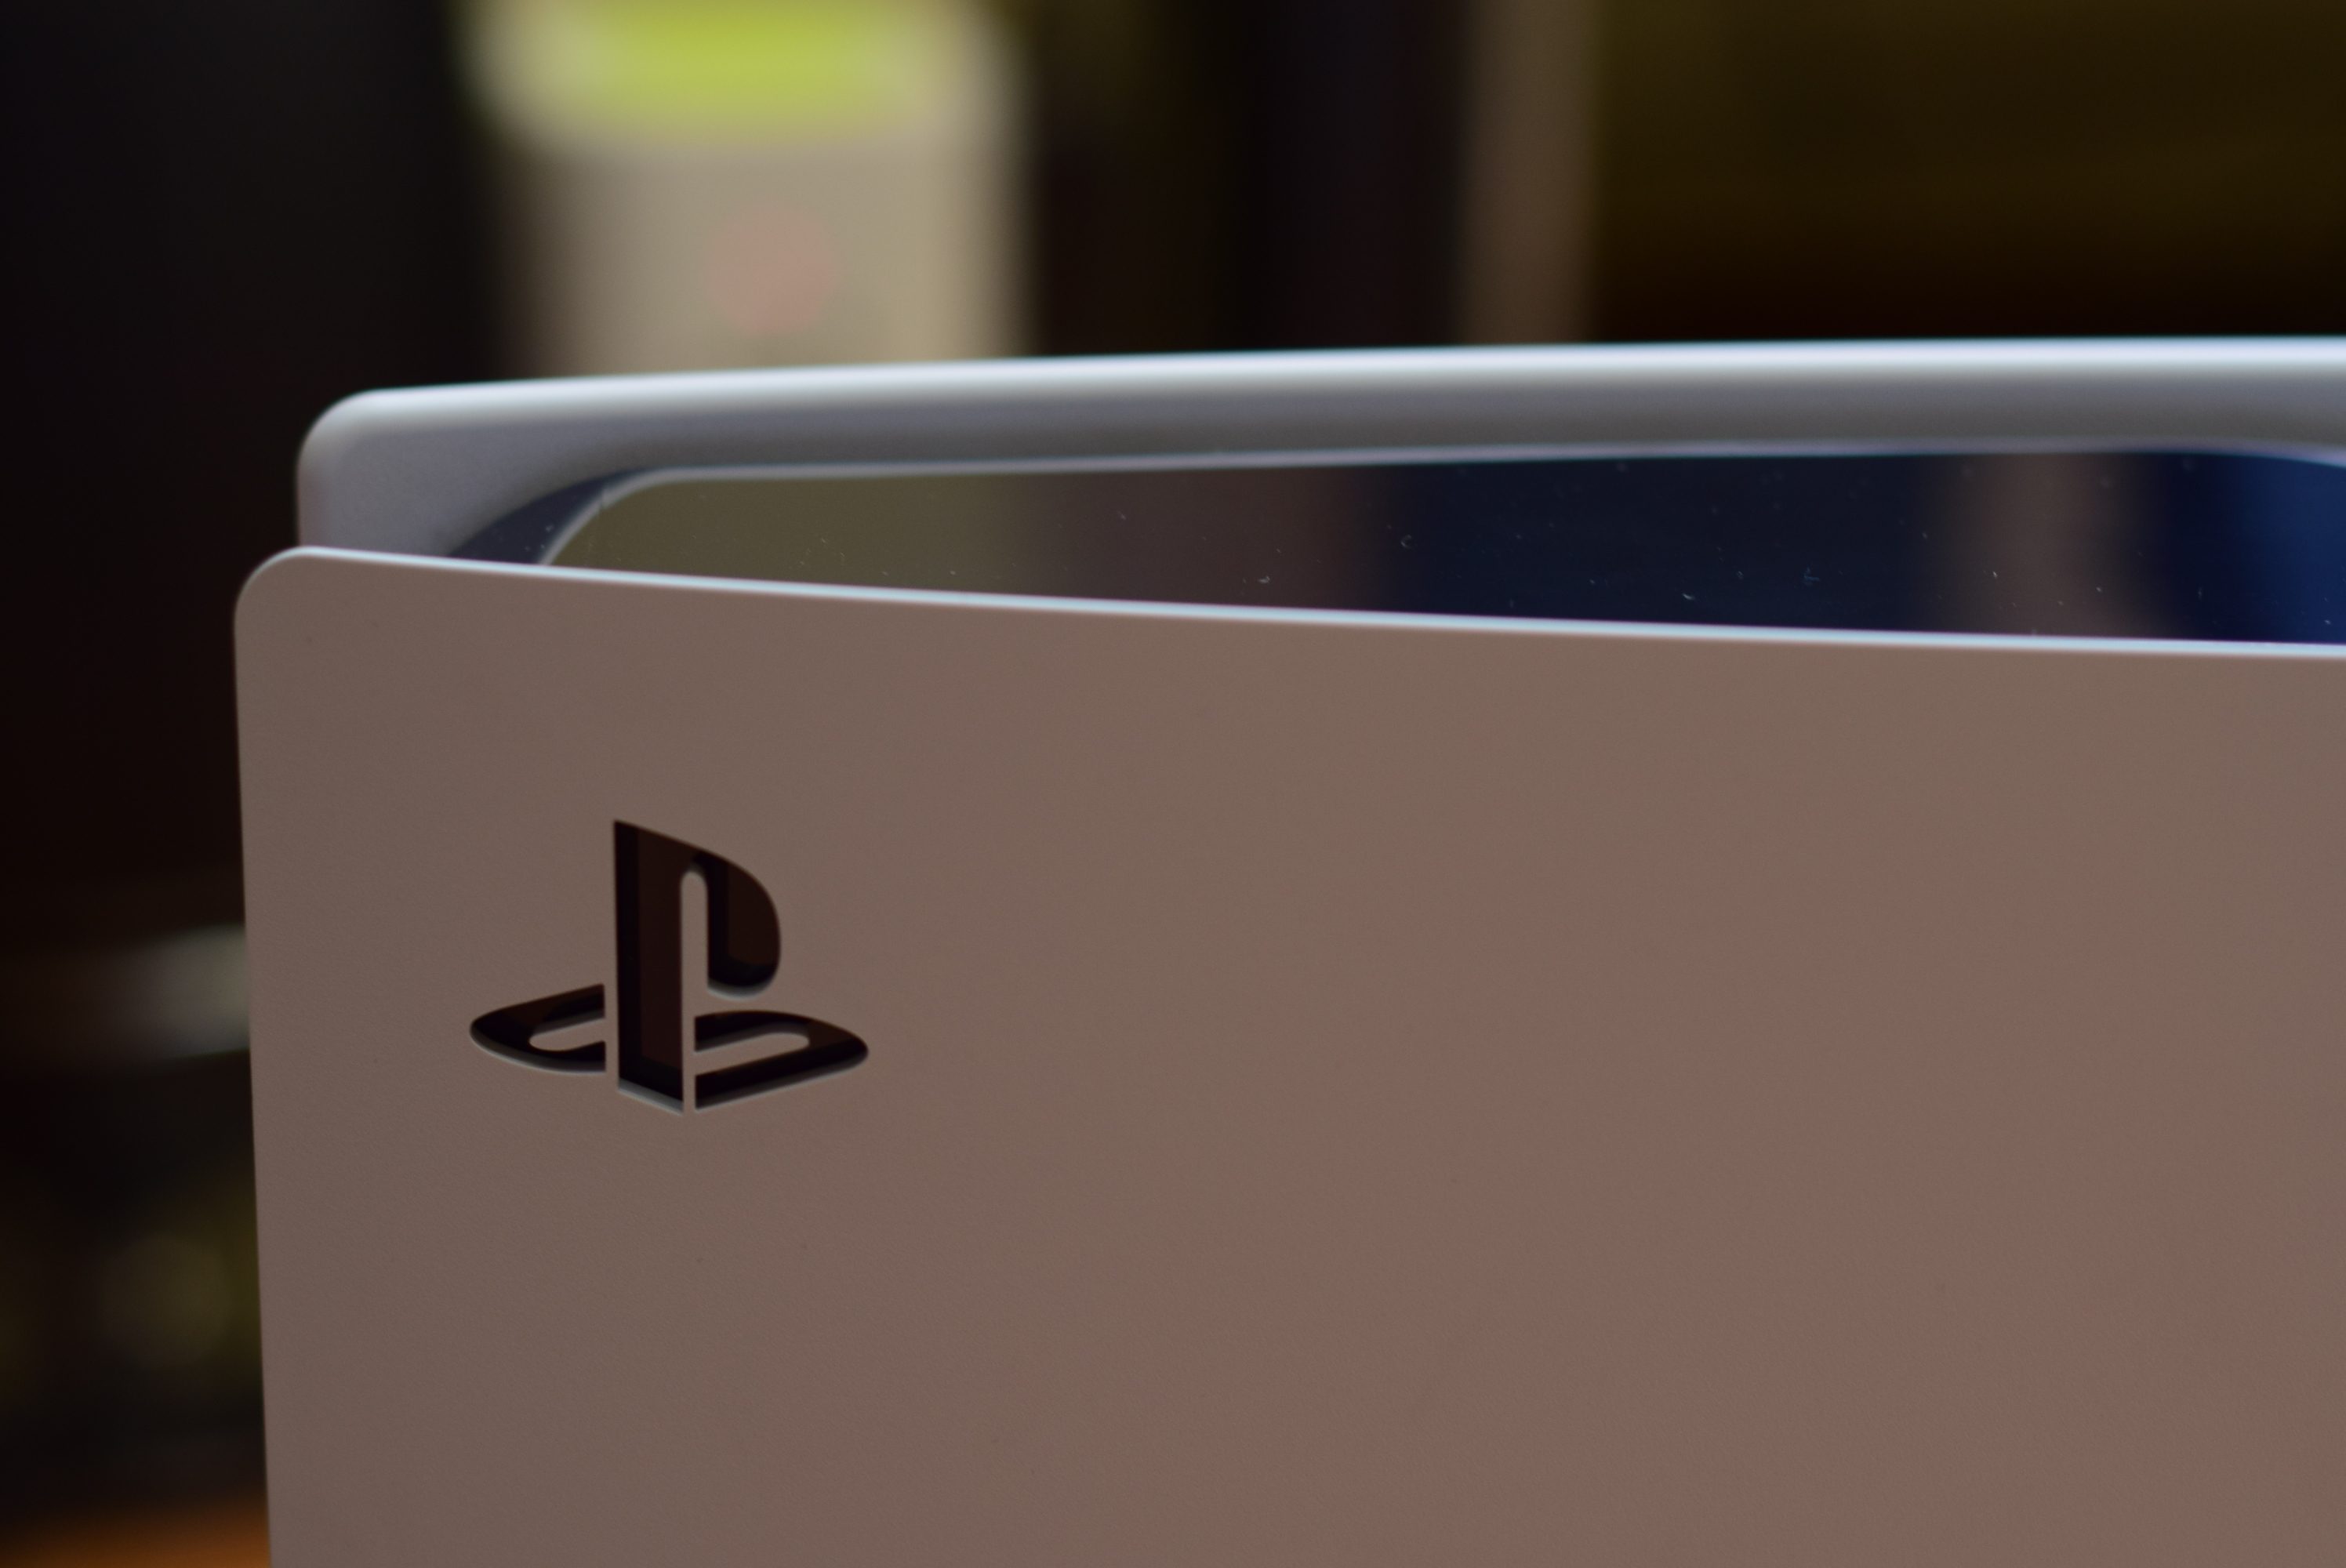 Filipino gamer finds installed games in supposedly brand new PS5